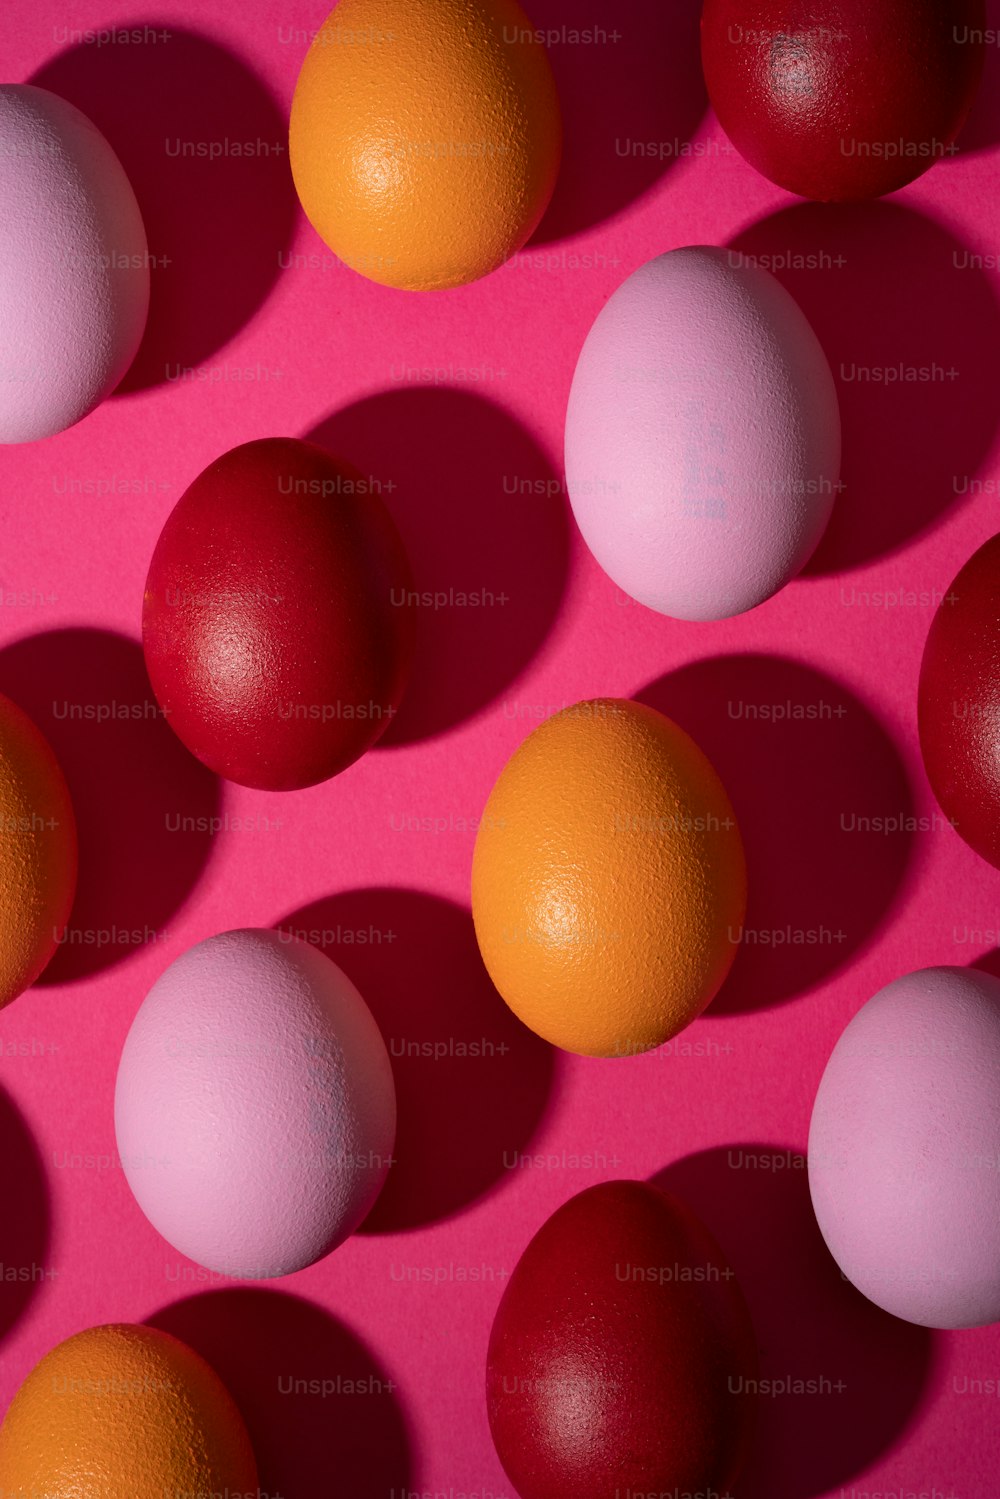 a group of eggs sitting next to each other on a pink surface